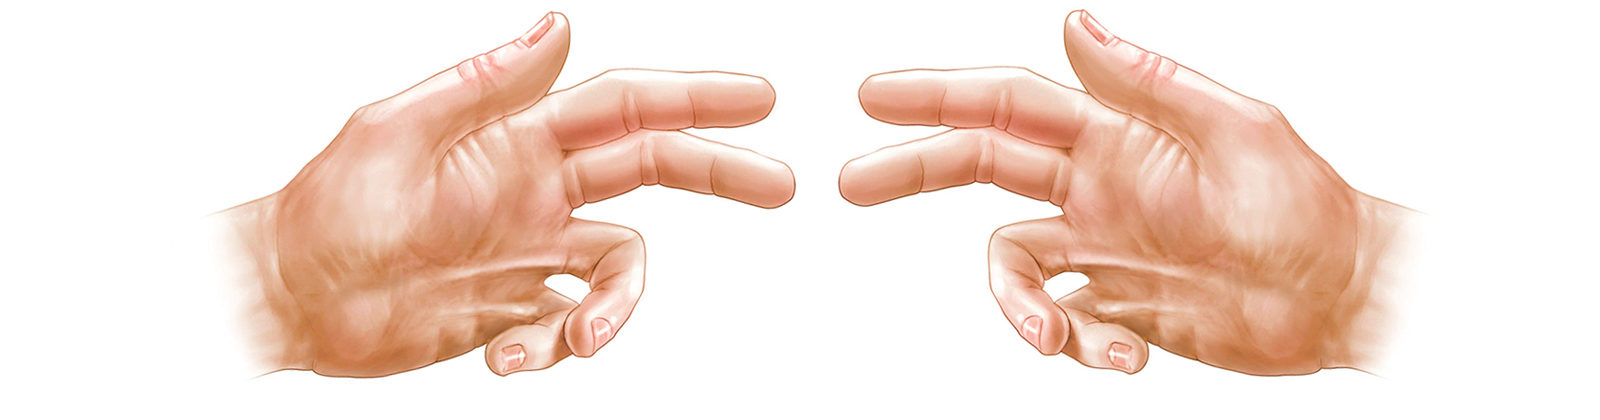 Dupuytren's Contracture in two hands with contracting fingers.